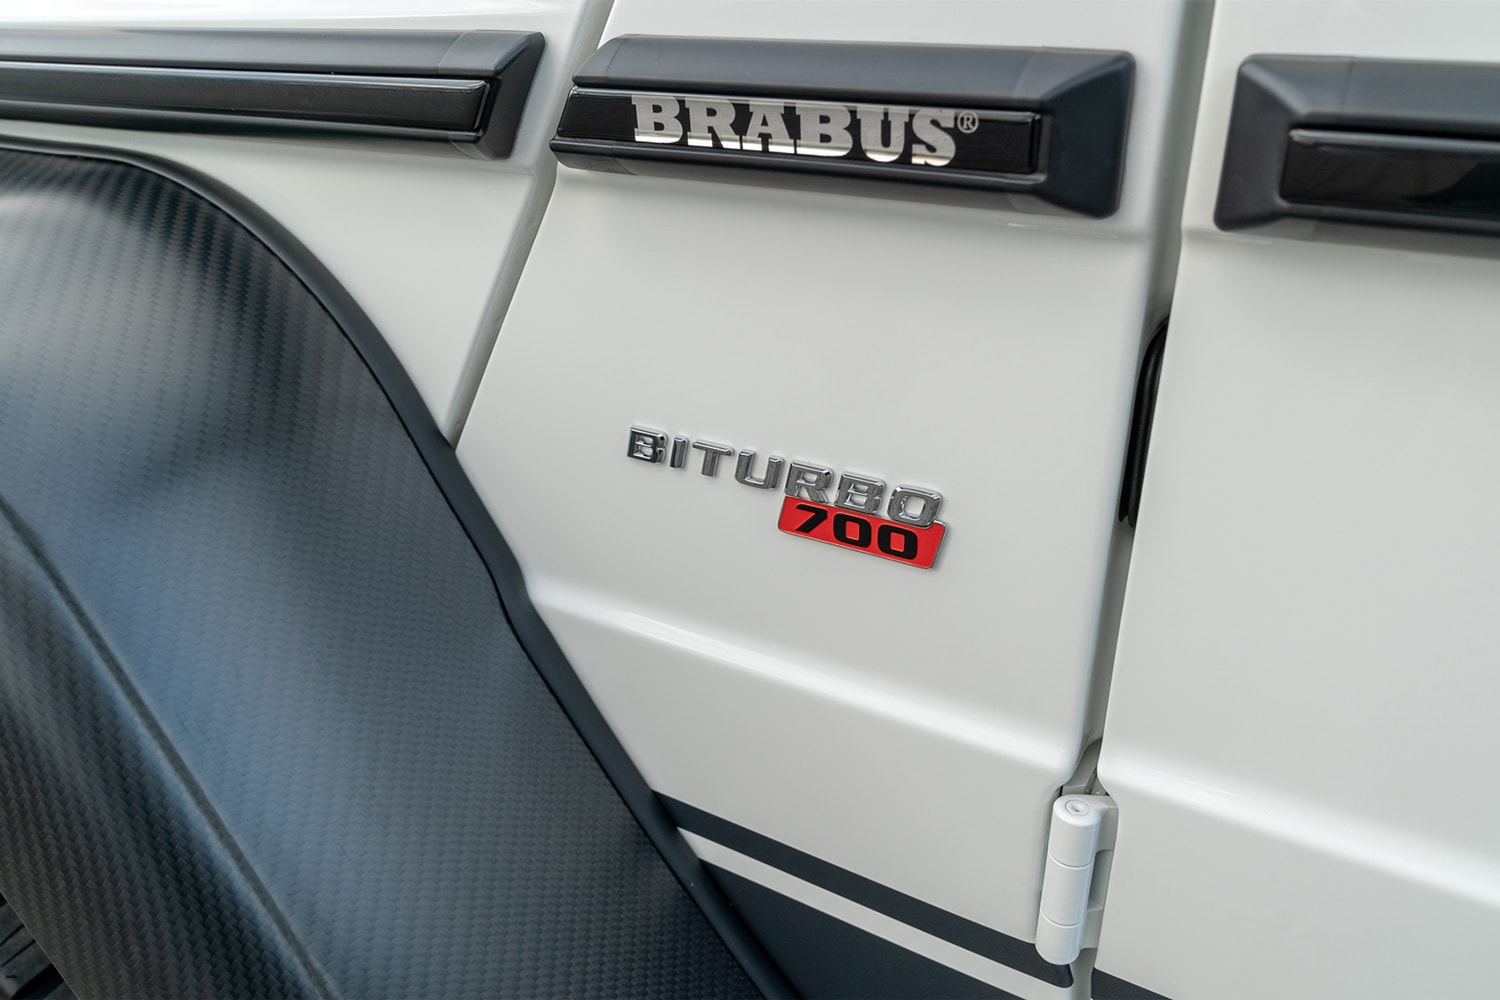 Brabus 700 4x4² Final Edition Info supercar Tuning racing speed off-road luxury horsepower engineering performance 